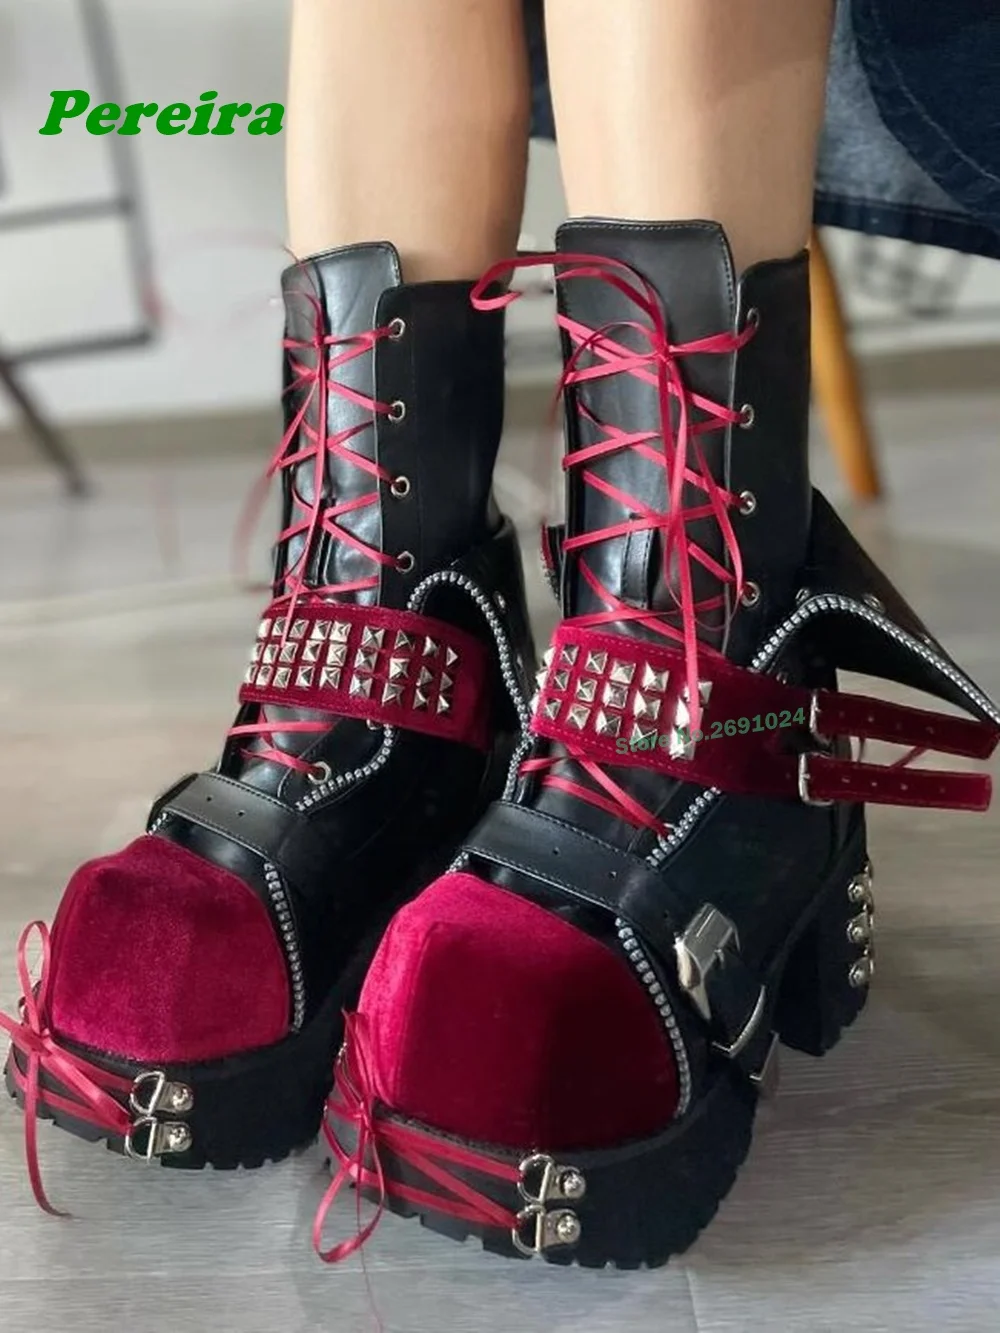 

Dark Gothic Short Boots Platform Thick Soled Lace Up Ankle Boots Winter Chunky Heeled Women's Shoes Rivet Metal Luxury Shoes